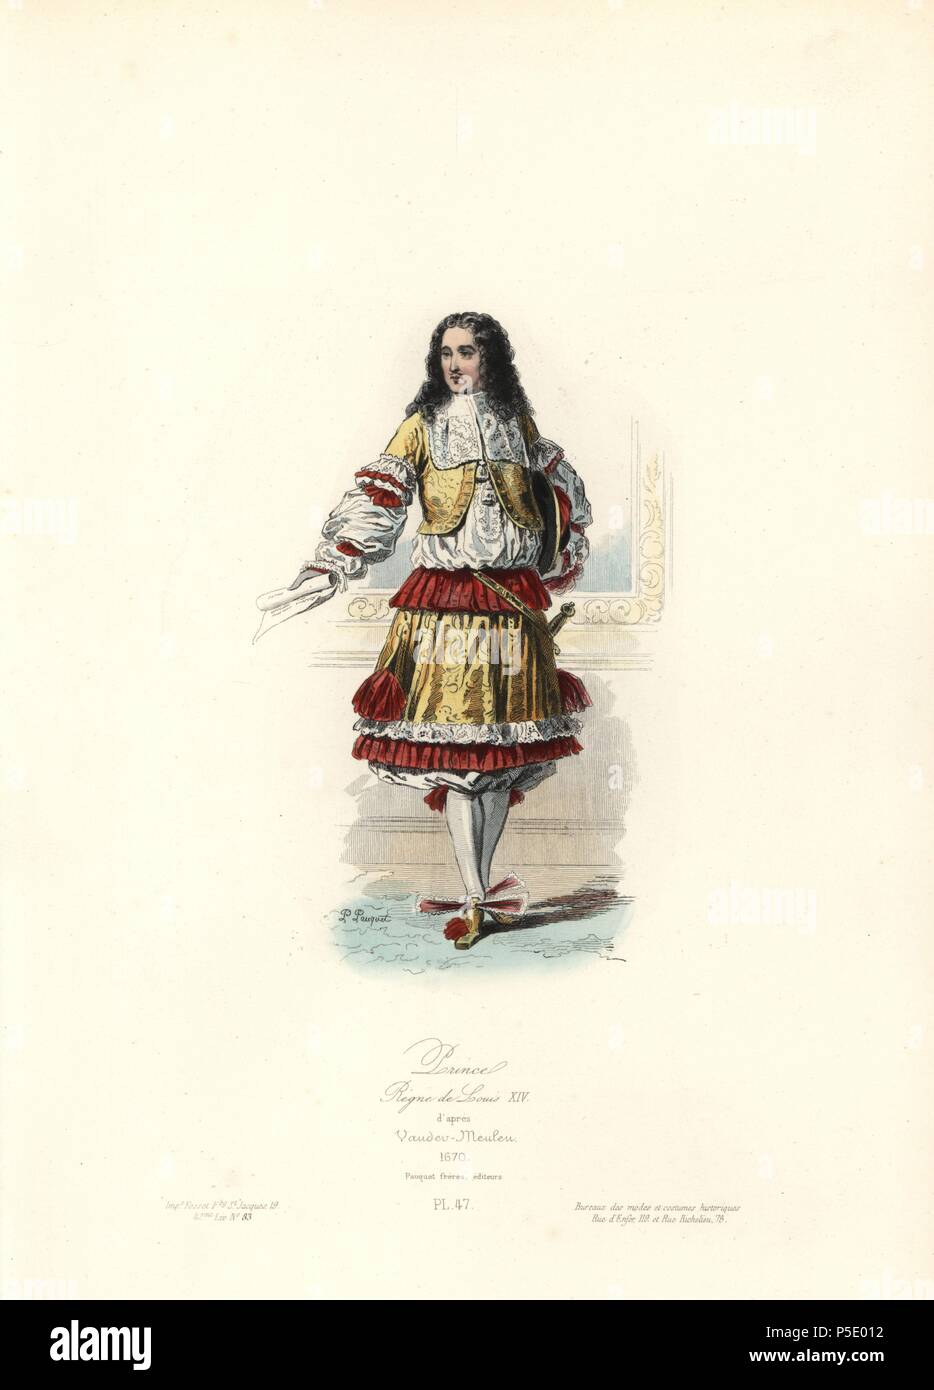 Prince, reign of Louis XIV, 1670. Handcoloured steel engraving by Polidor Pauquet after Adam Frans van der Meulen (1632-1690) from the Pauquet Brothers' 'Modes et Costumes Historiques' (Historical Fashions and Costumes), Paris, 1865. Hippolyte (b. 1797) and Polydor Pauquet (b. 1799) ran a successful publishing house in Paris in the 19th century, specializing in illustrated books on costume, birds, butterflies, anatomy and natural history. Stock Photo